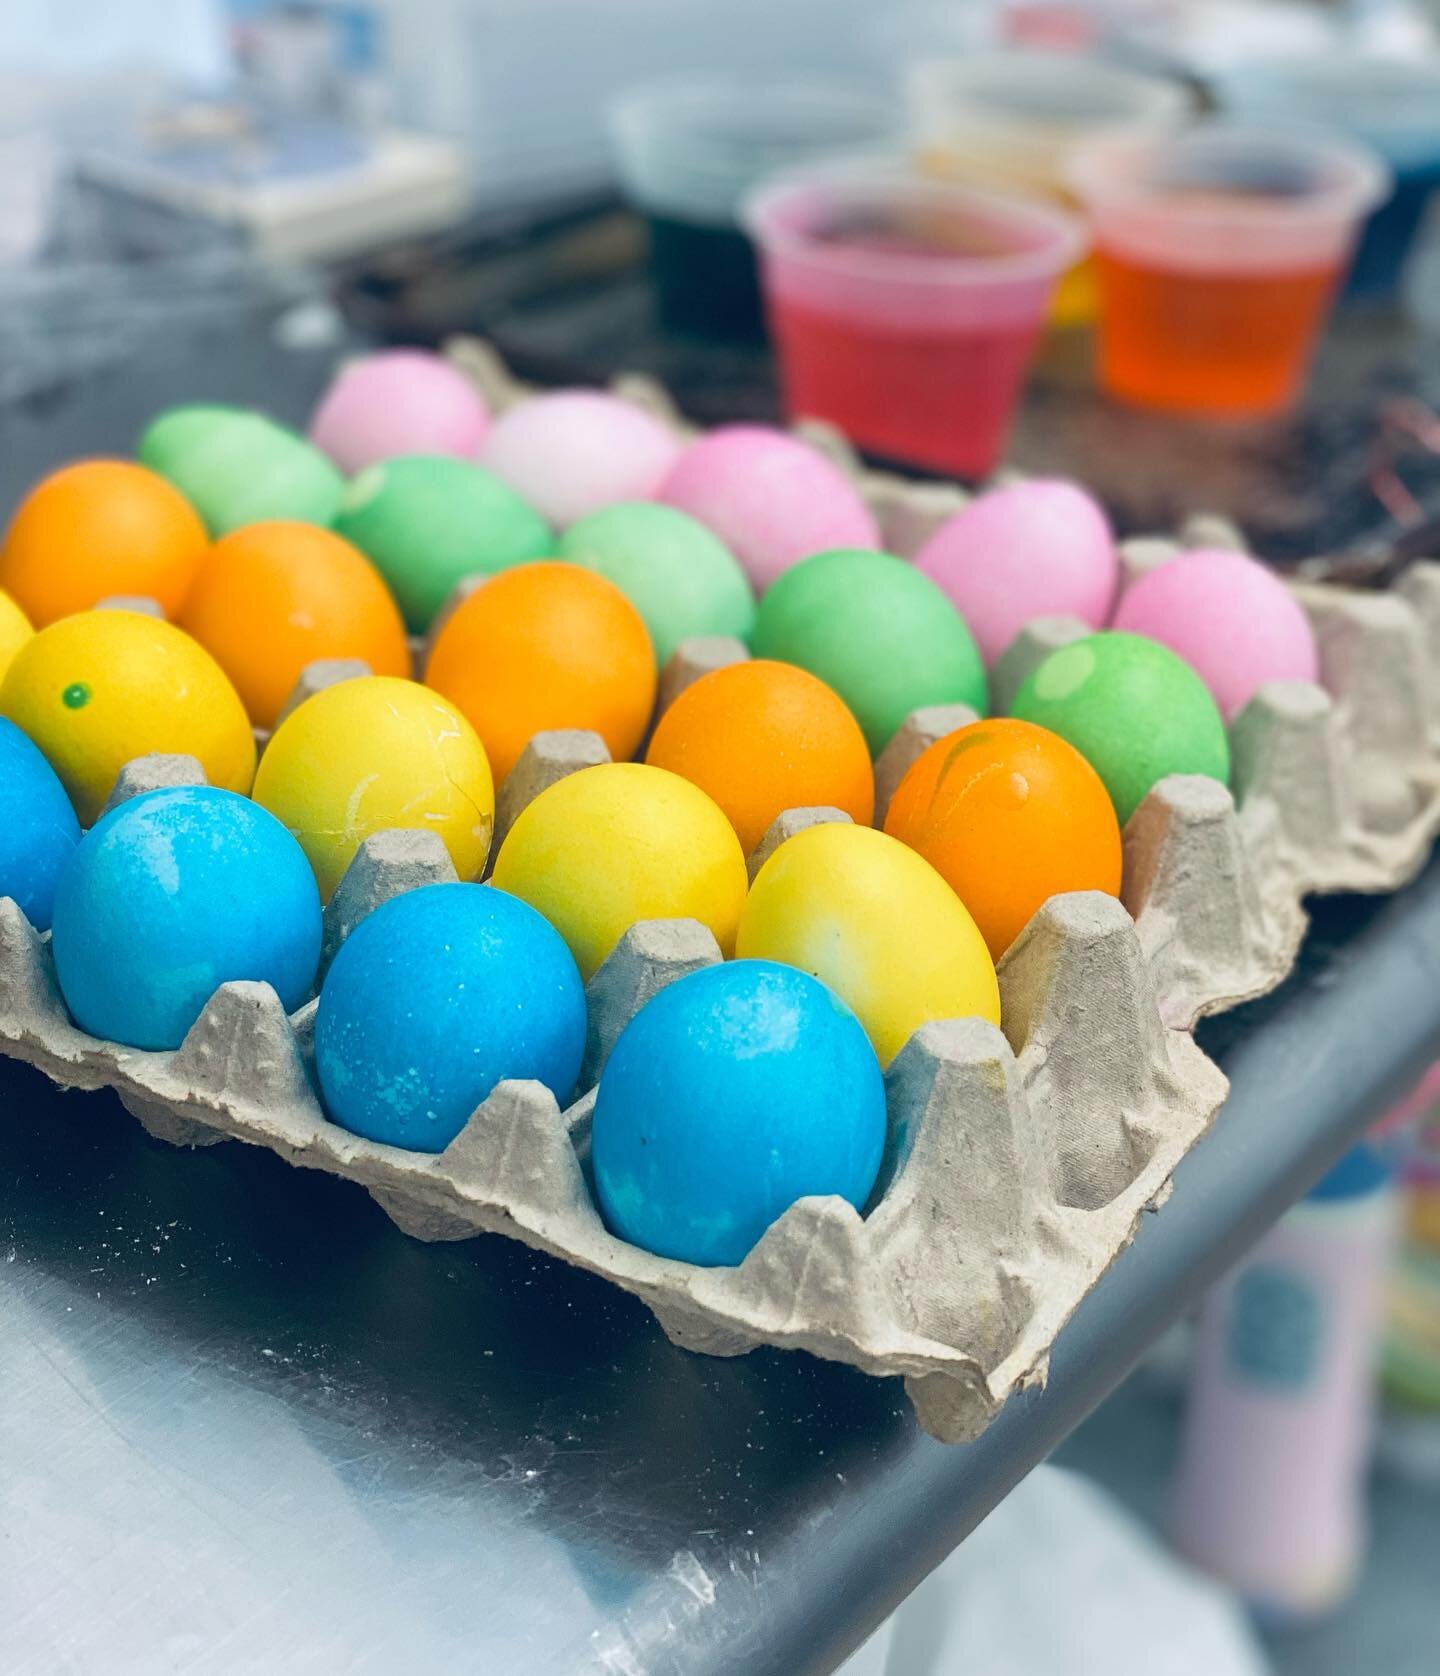 Behind the scenes: Italian Easter bread🎬LAST DAY to place your preorder! We will have extra treats on Saturday but can&rsquo;t guarantee everything on the menu. 

#sweetandflour #secaucus #nj #njbakery #jersey #customcakes #cakelife #cupcakes #small